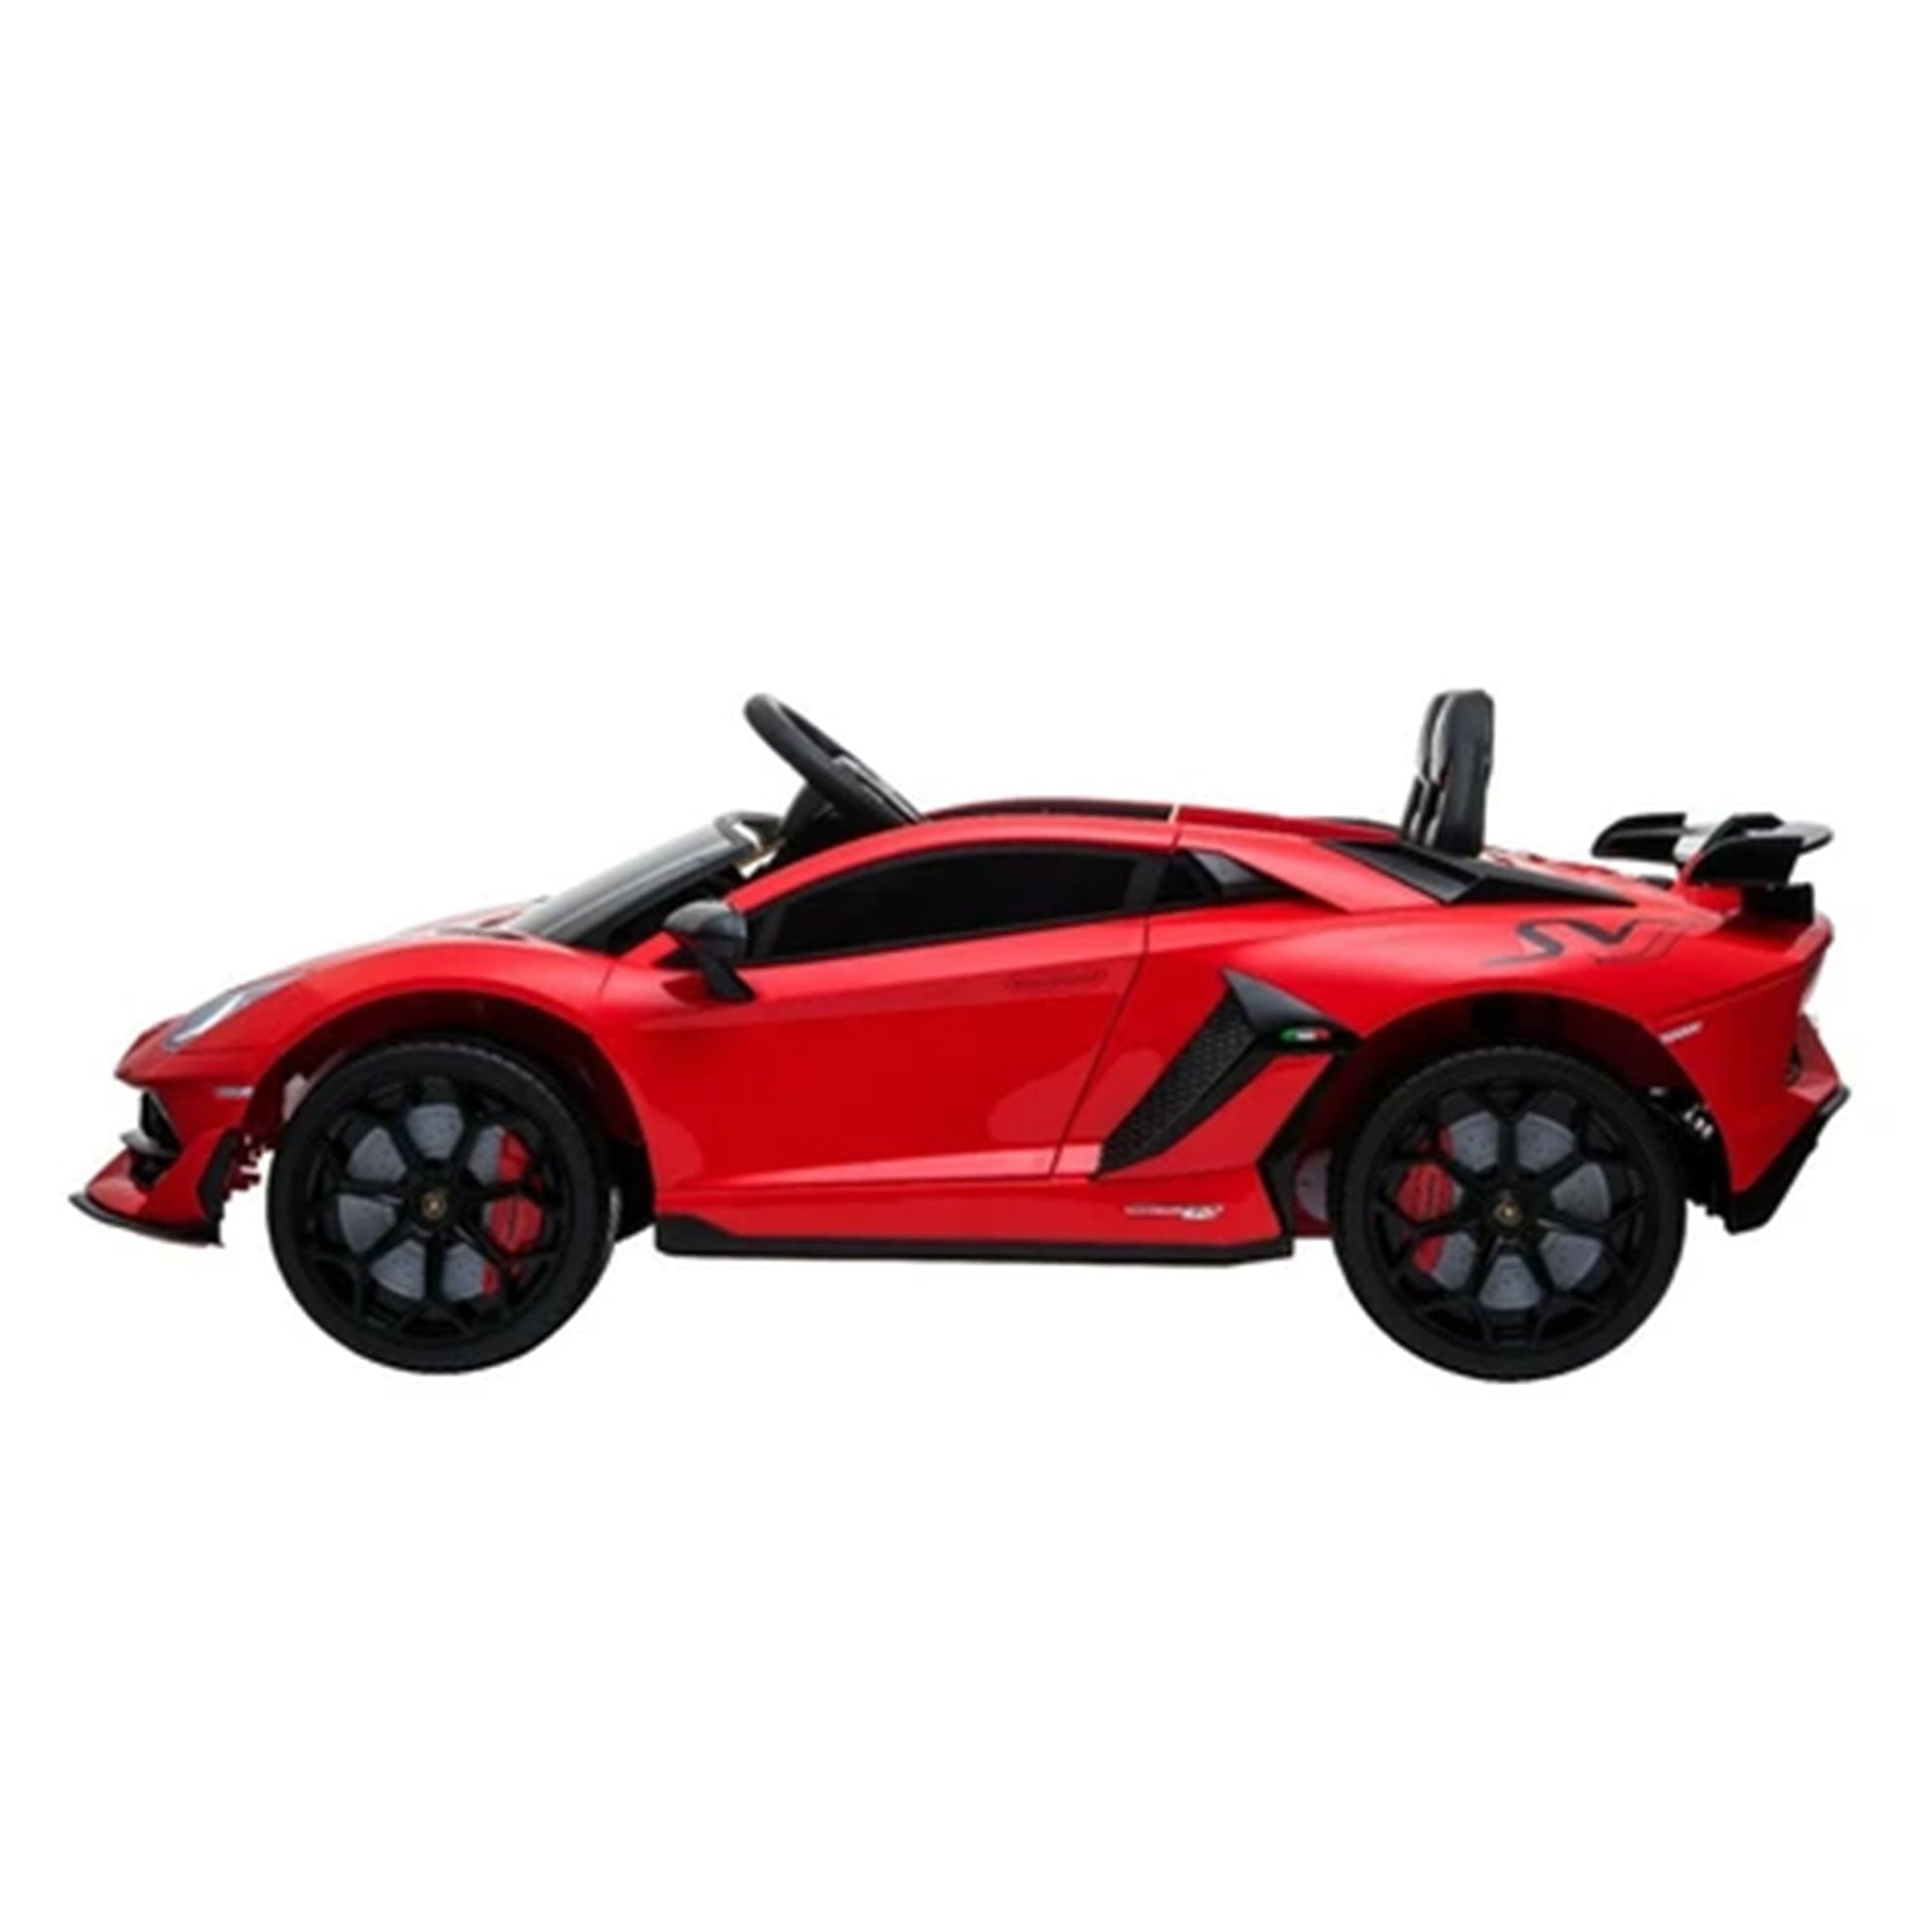 "Red Lamborghini SVJ 12 Volt electric ride-on car with remote control and rubber EVA tyres at Kids Car store, on a white background."